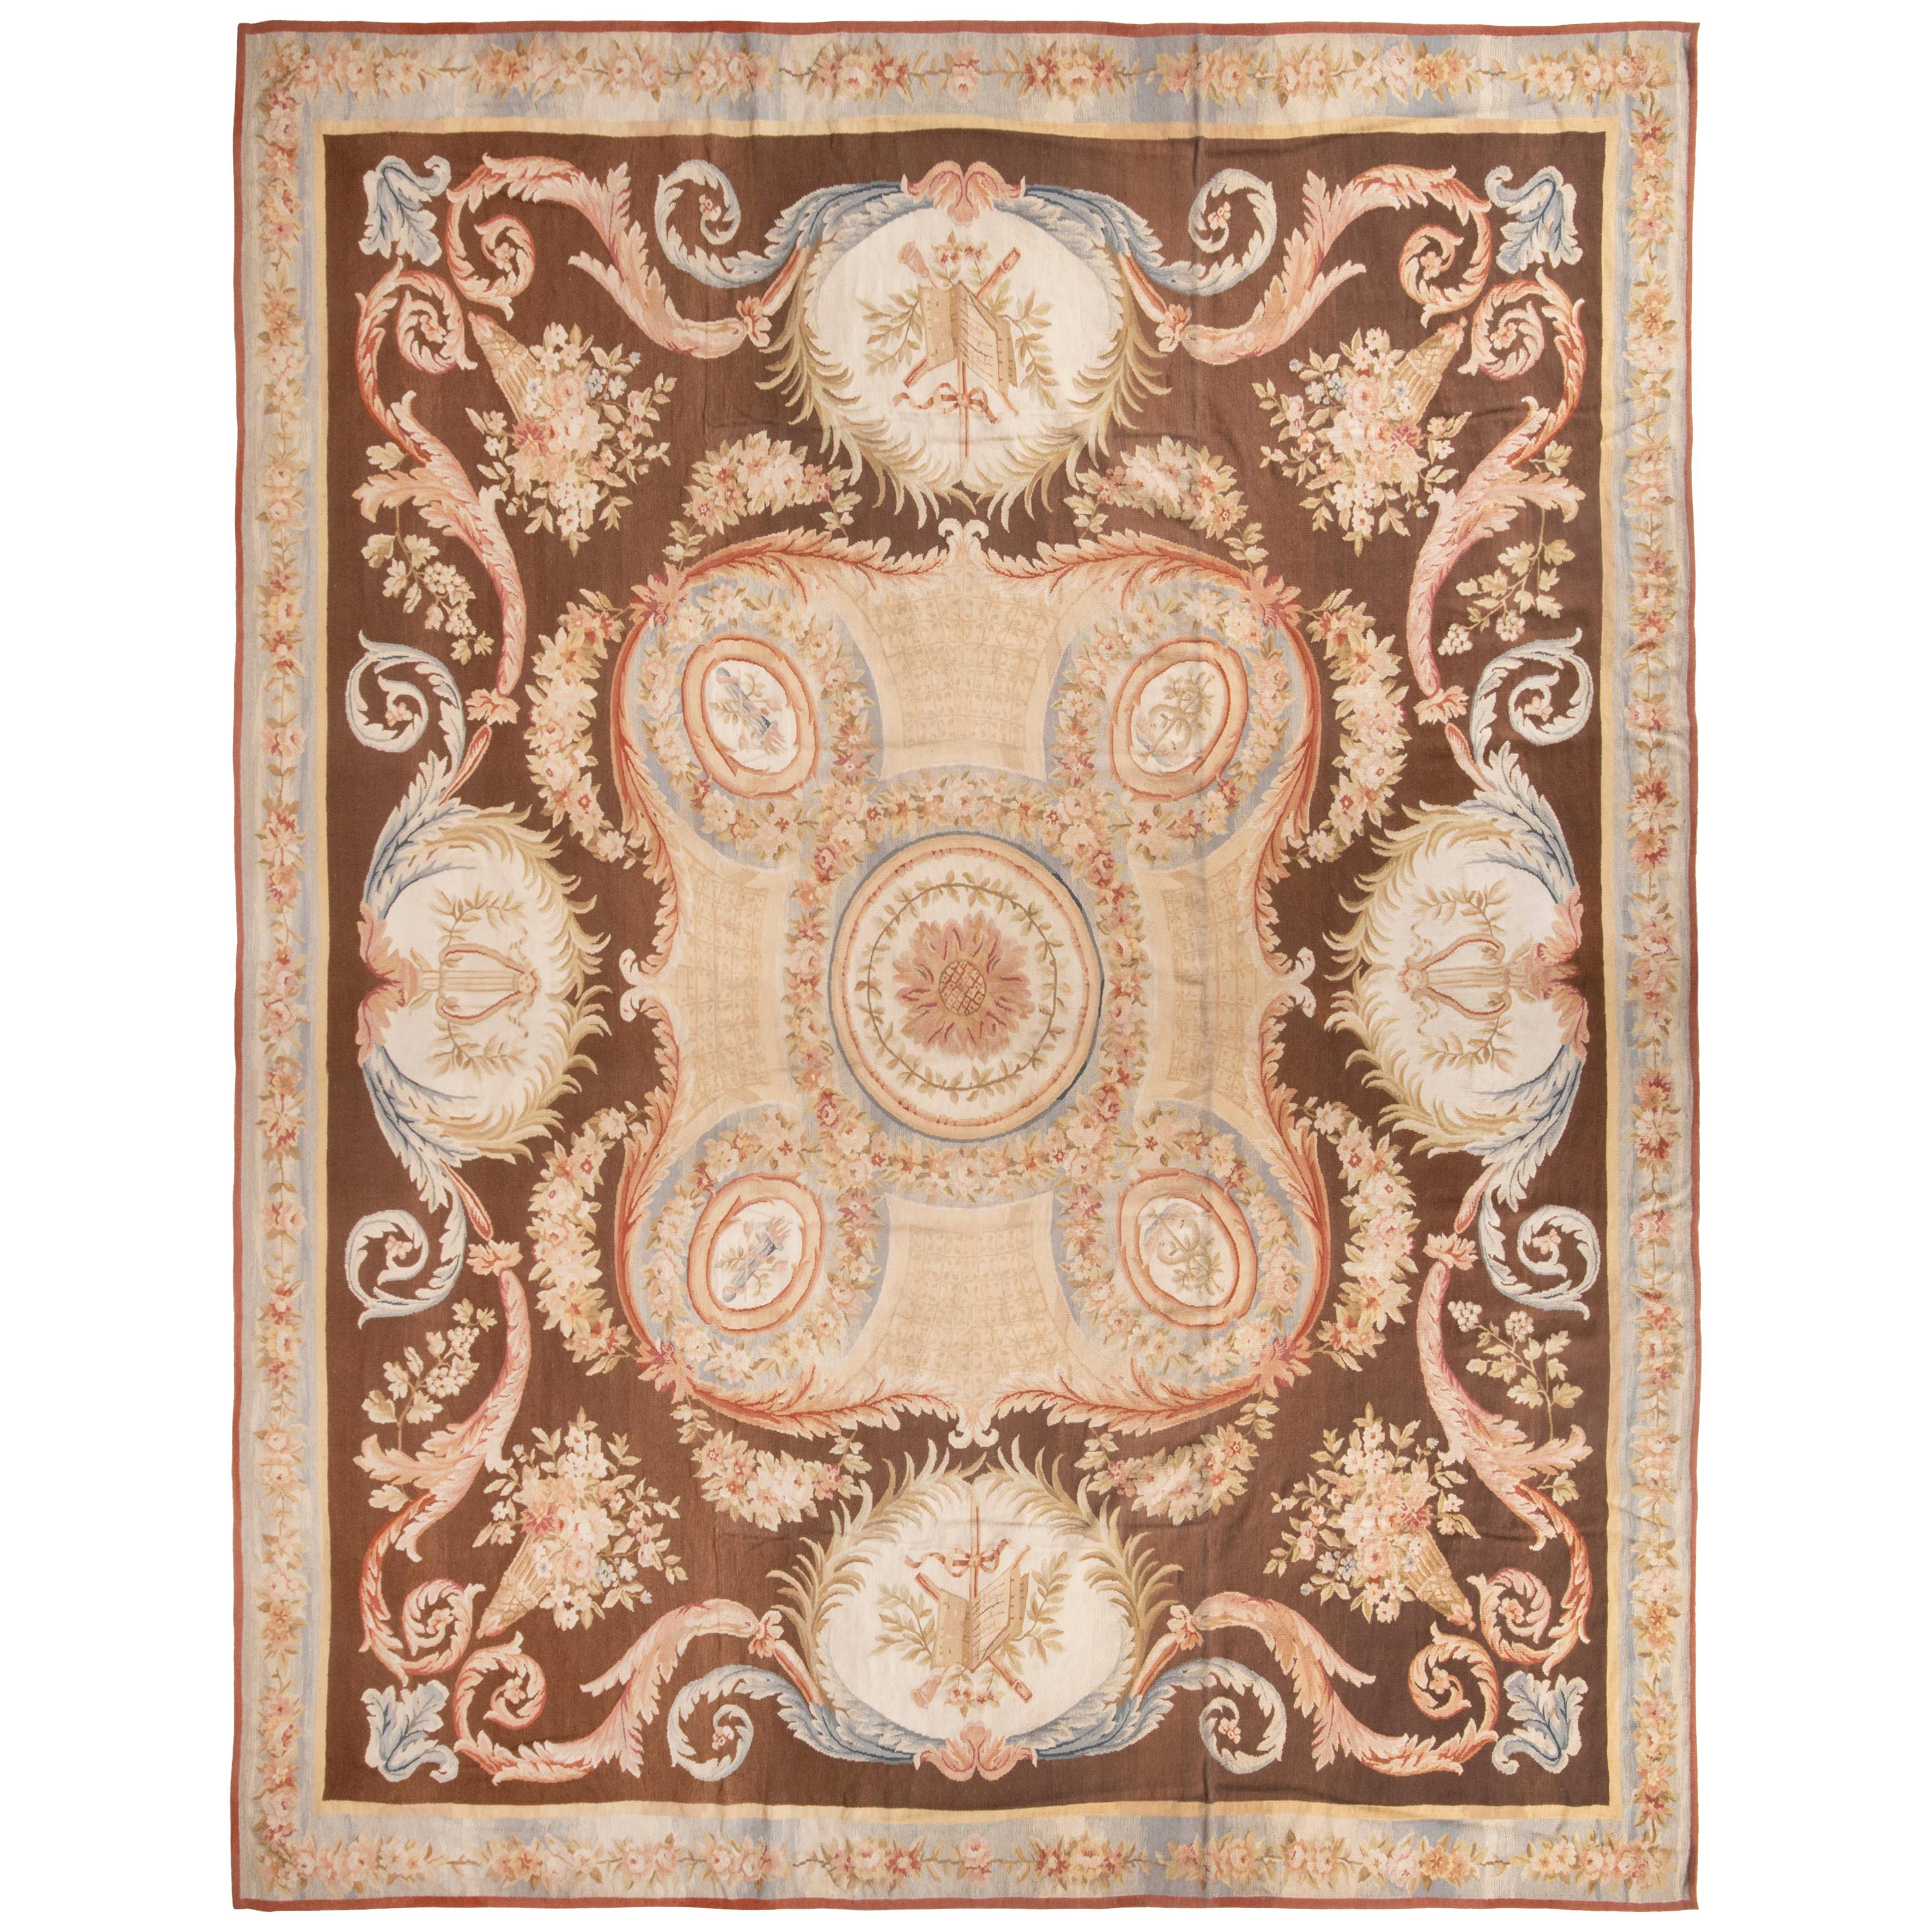 New Aubusson Pink and Brown Wool Rug with All-Over Floral Patterns